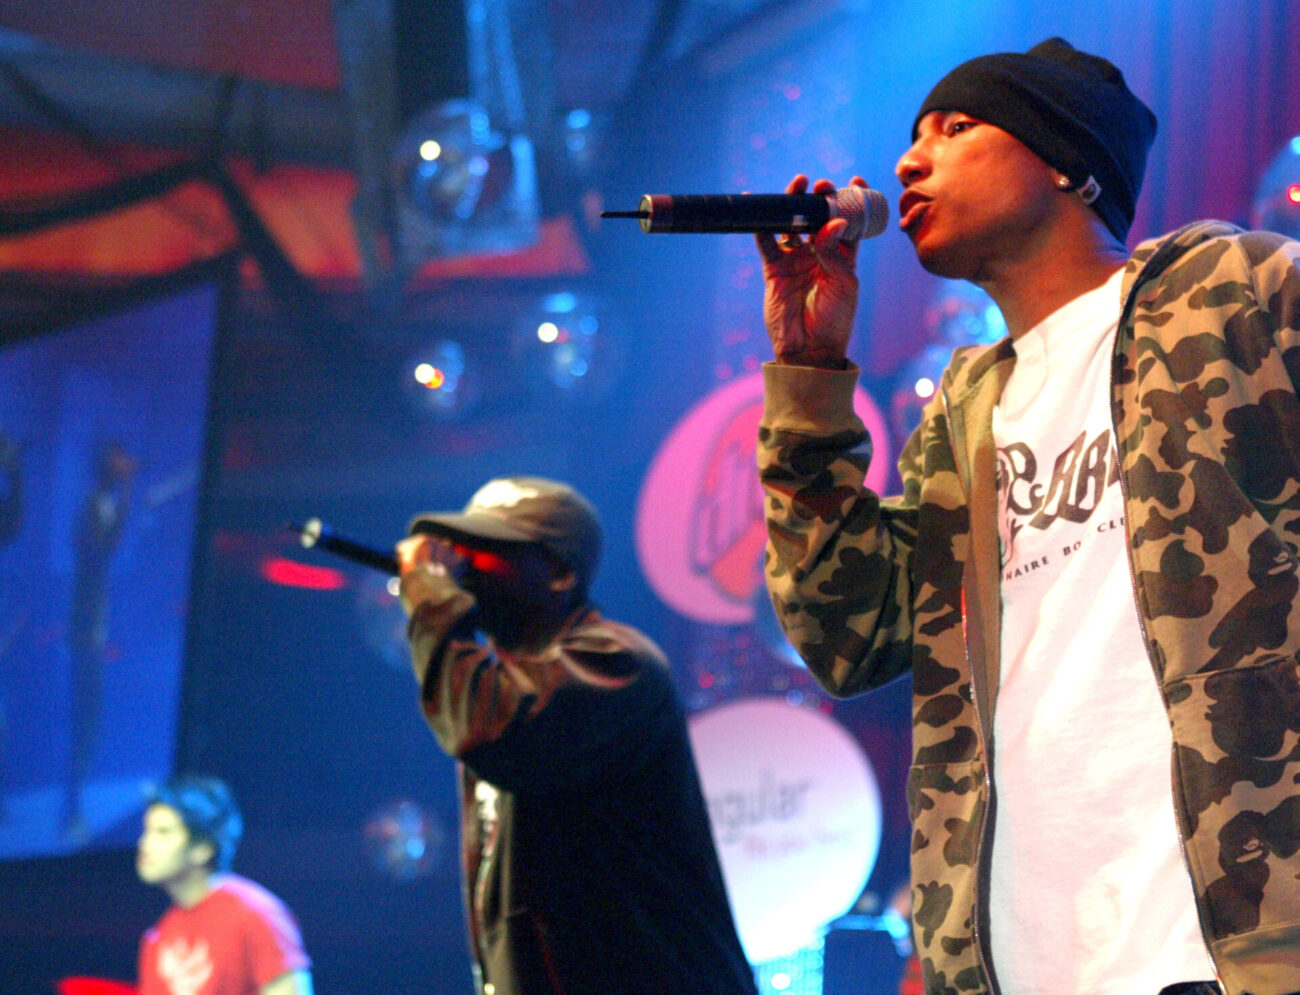 Pharrell Williams and Shay of N.E.R.D.